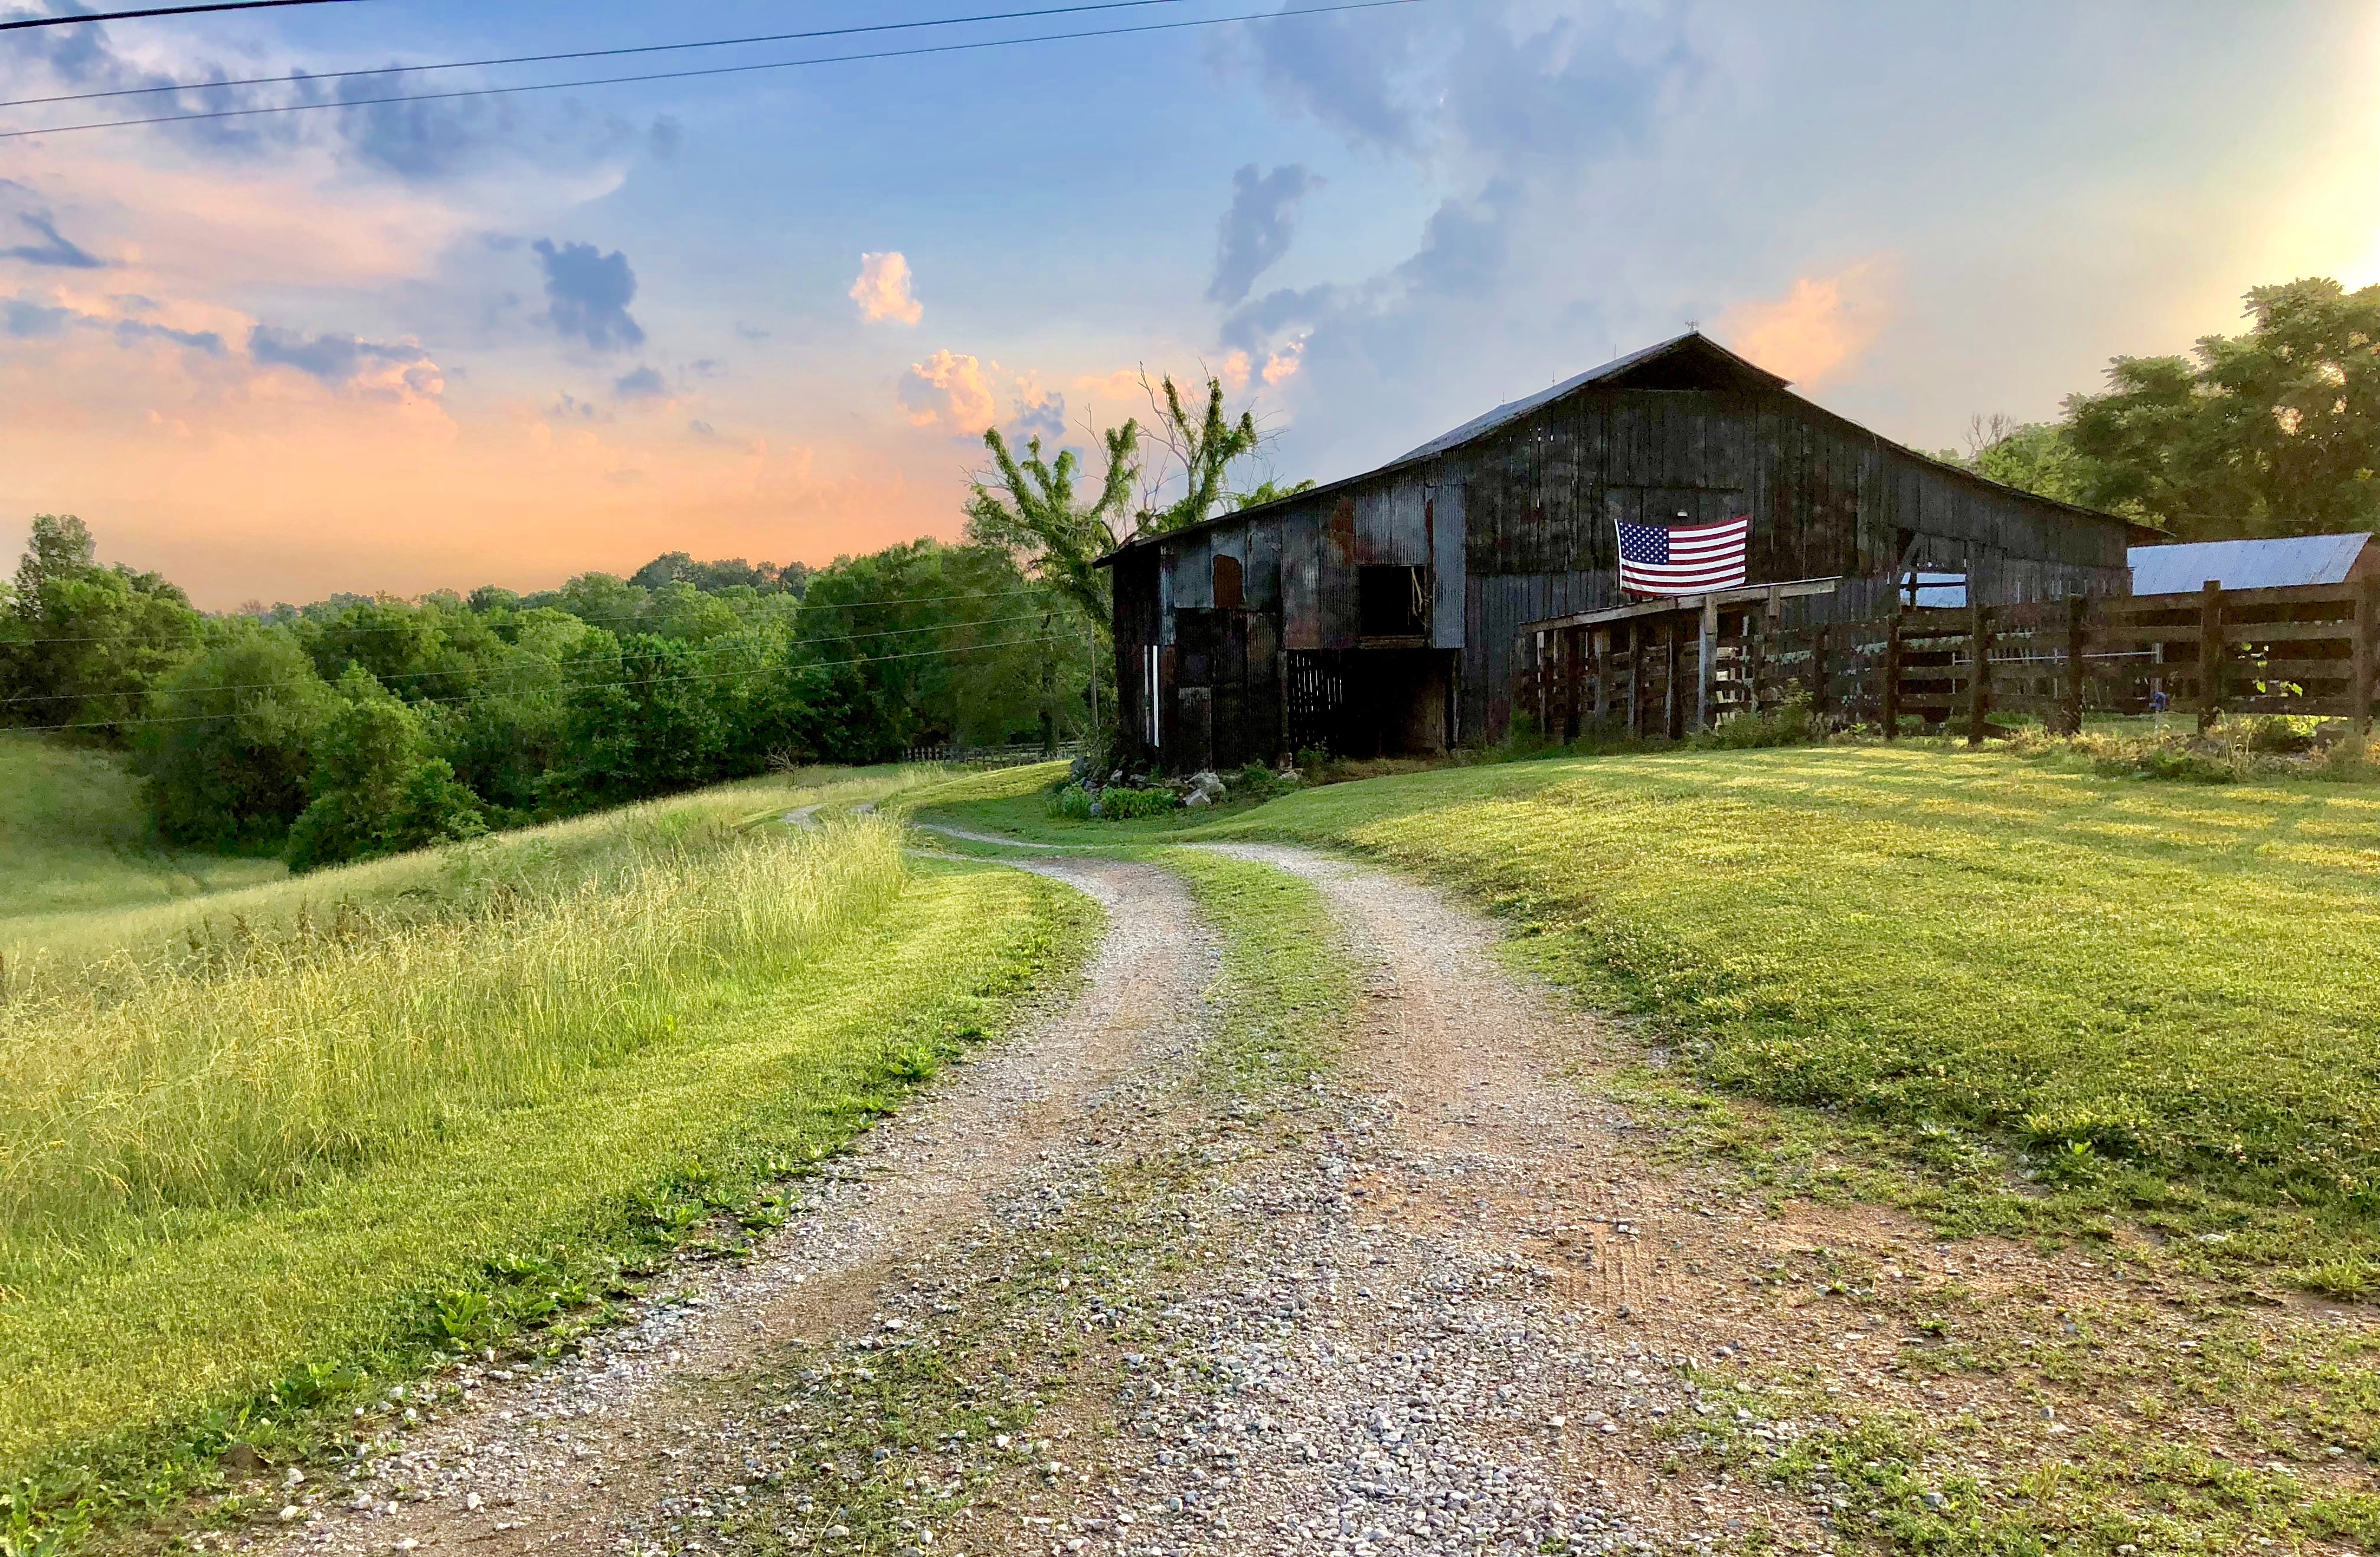 Photo of a barn with U.S. flag on it